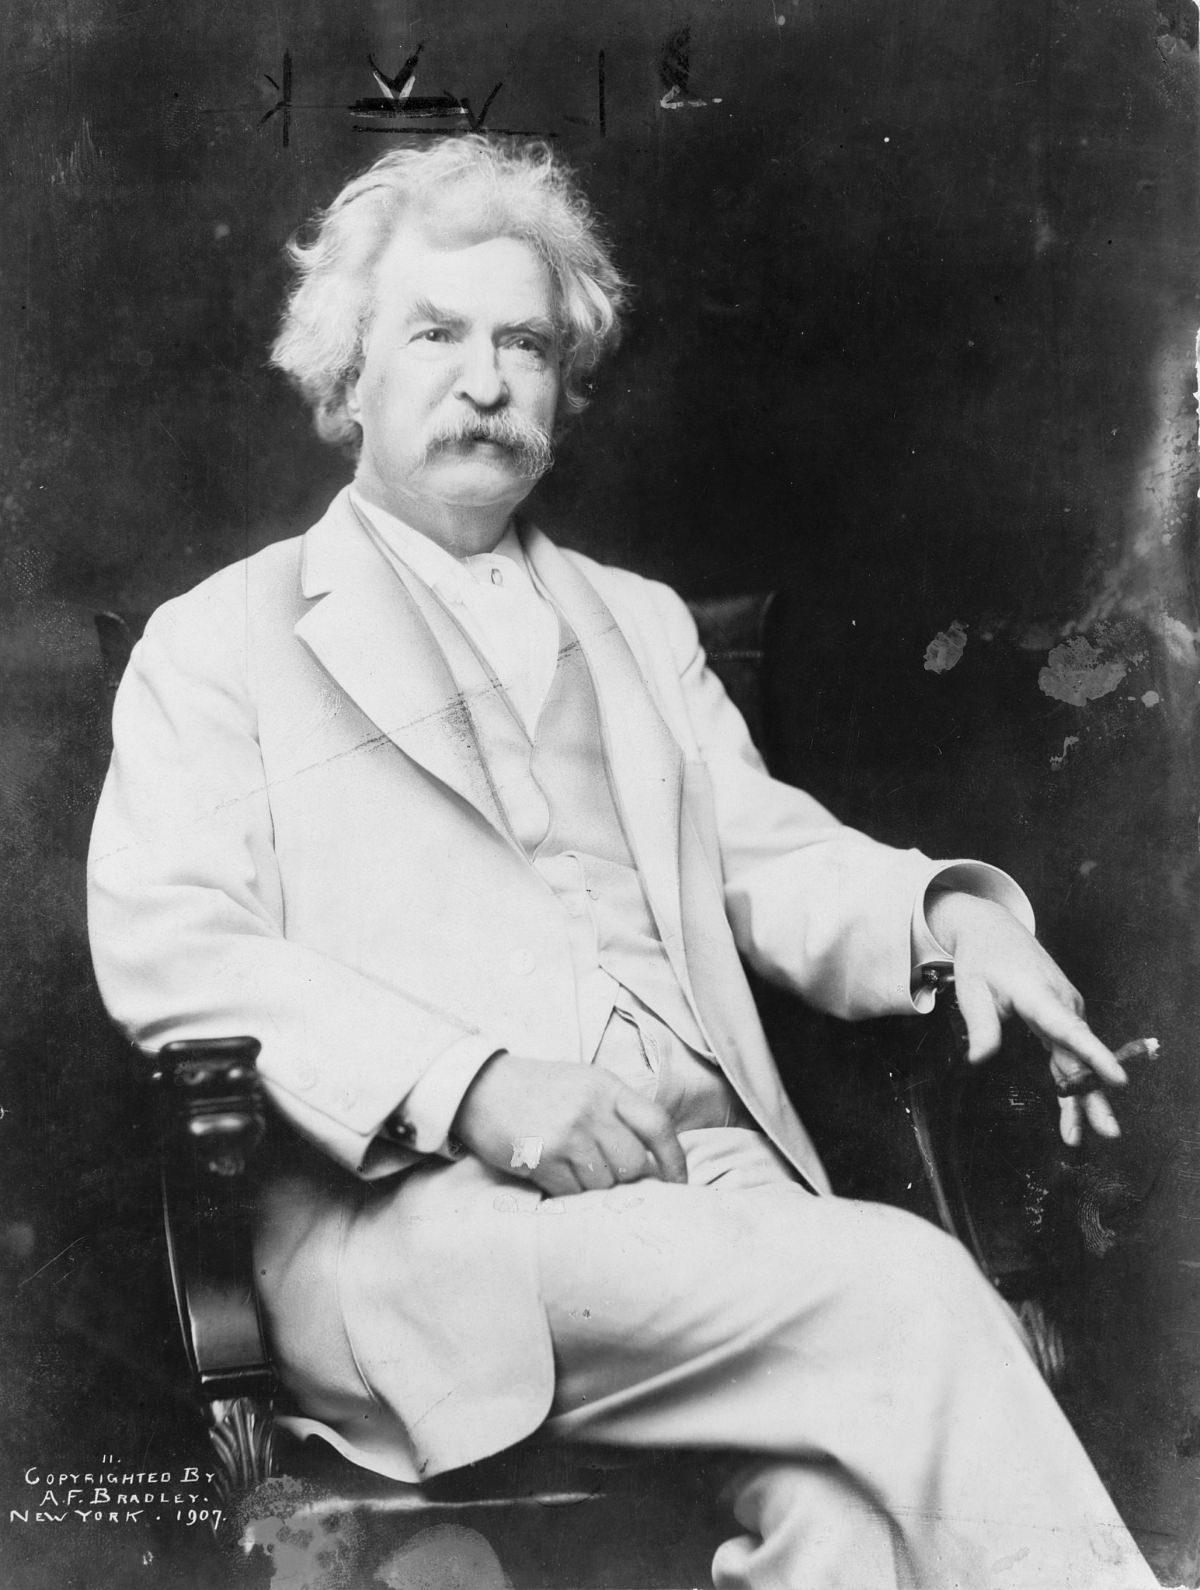 The Art of Portraiture: A.F. Bradley's Masterful Images of Mark Twain